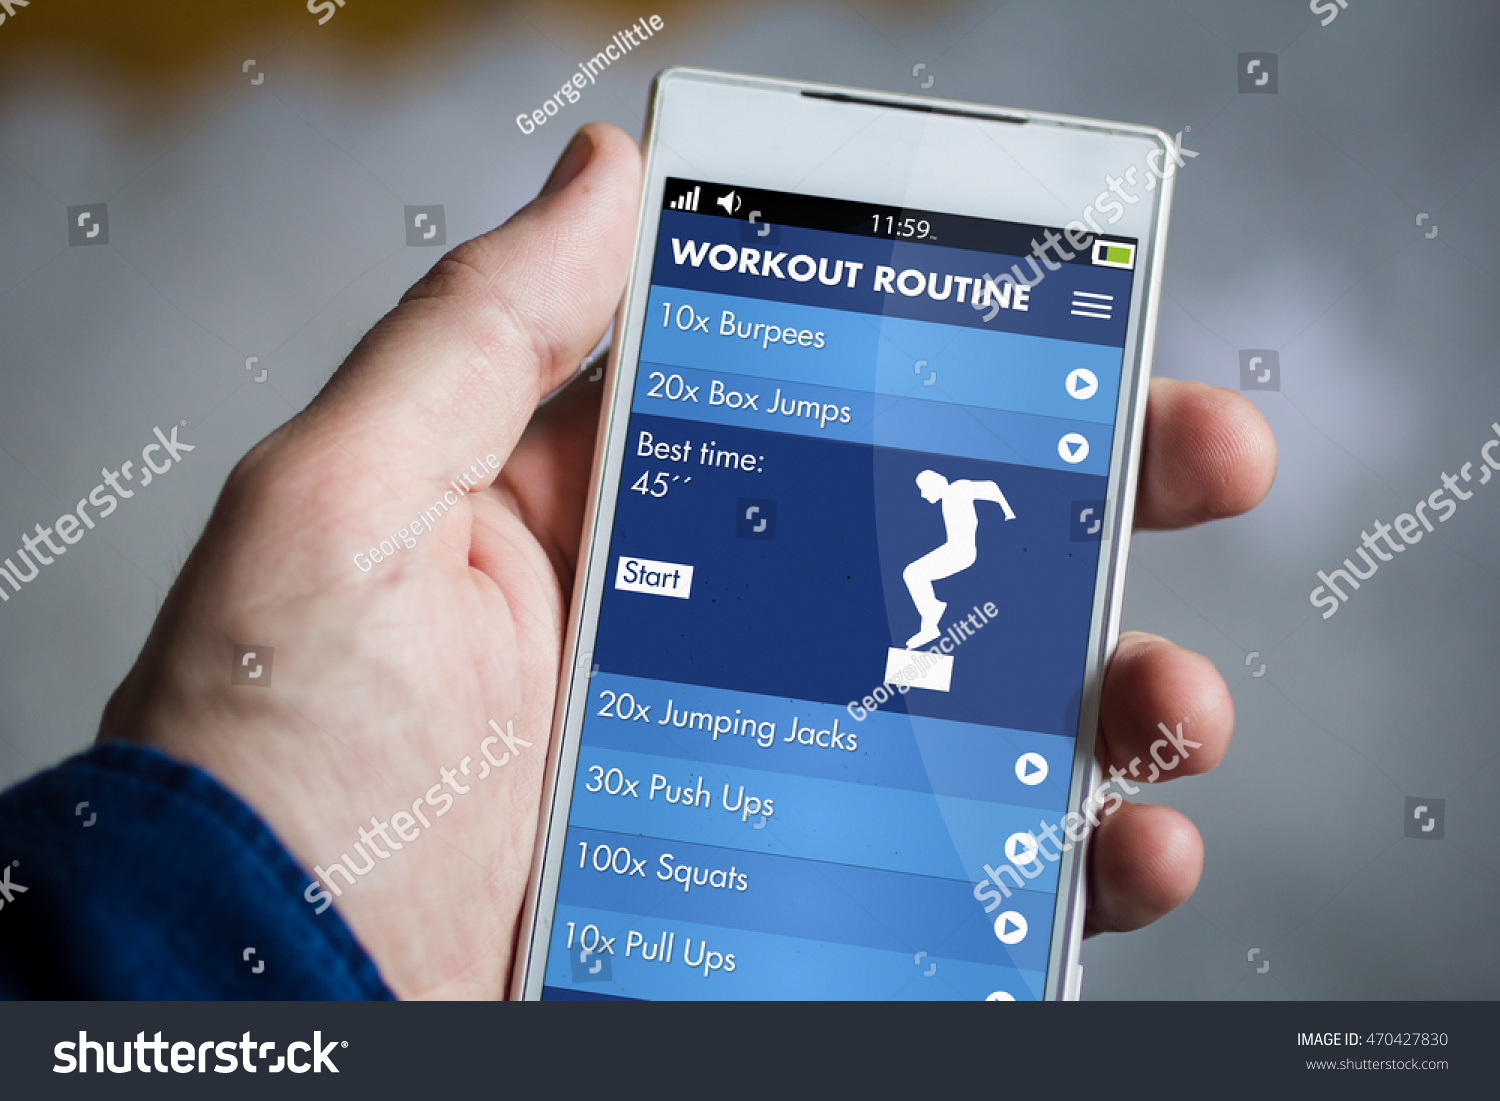 man hand holding fitness app smartphone. All screen graphics are made up. #470427830